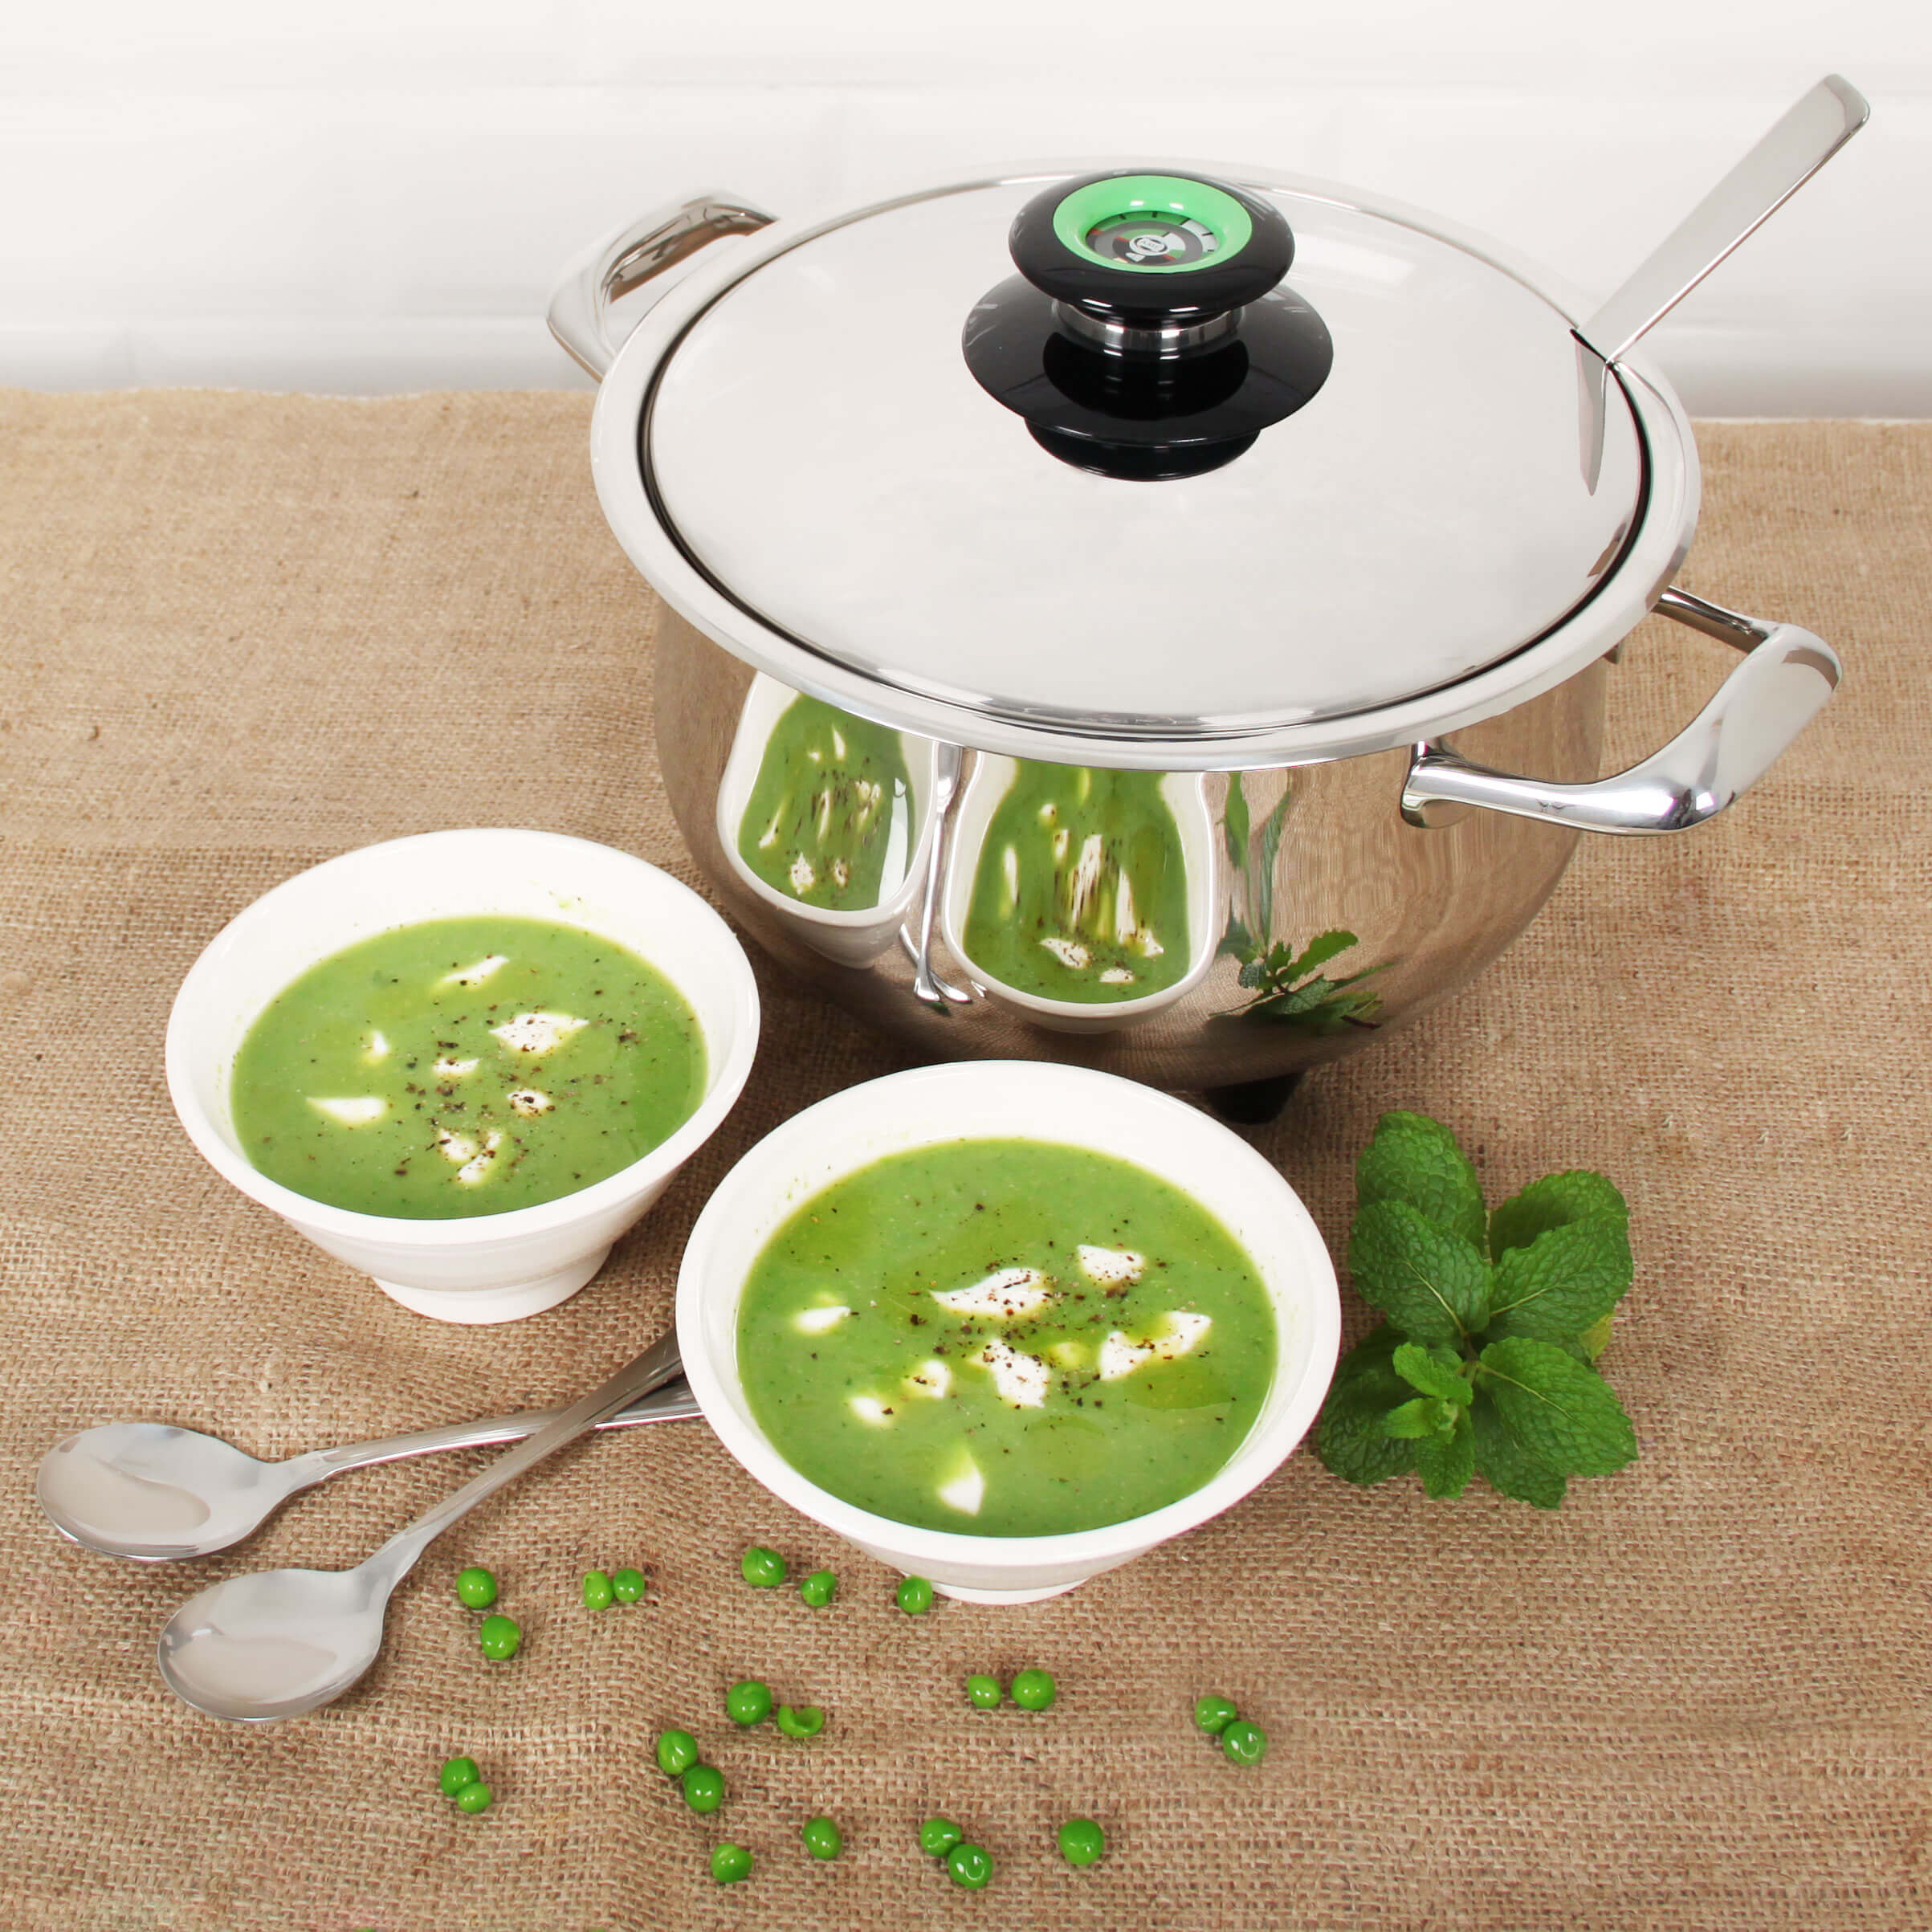 Pea & mint soup in the AMC Soup Tureen